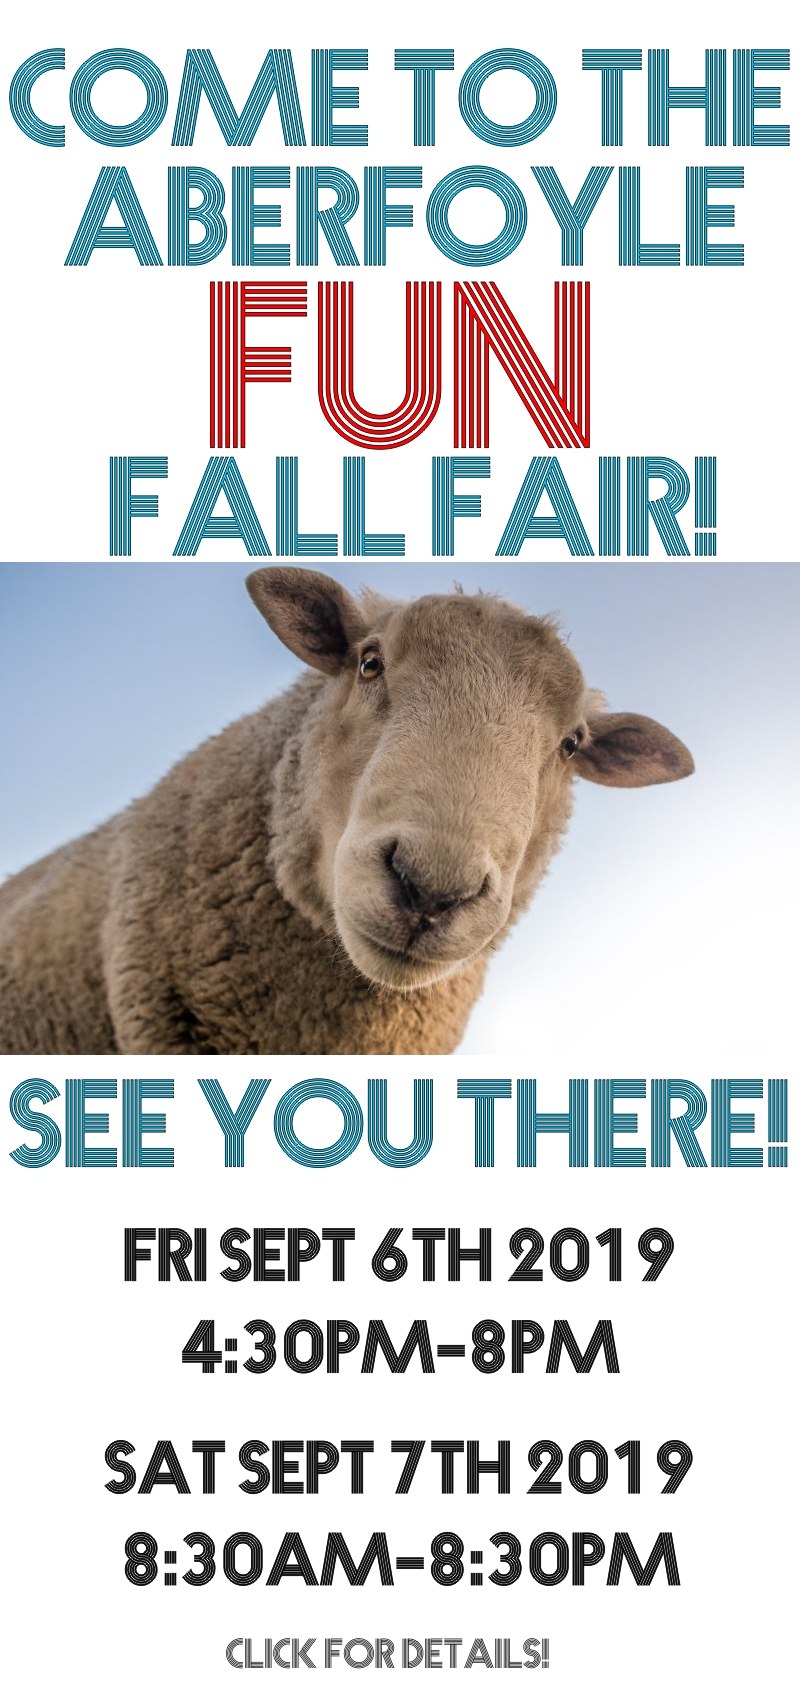 Come and visit the Aberfoyle fall fair this weekend!